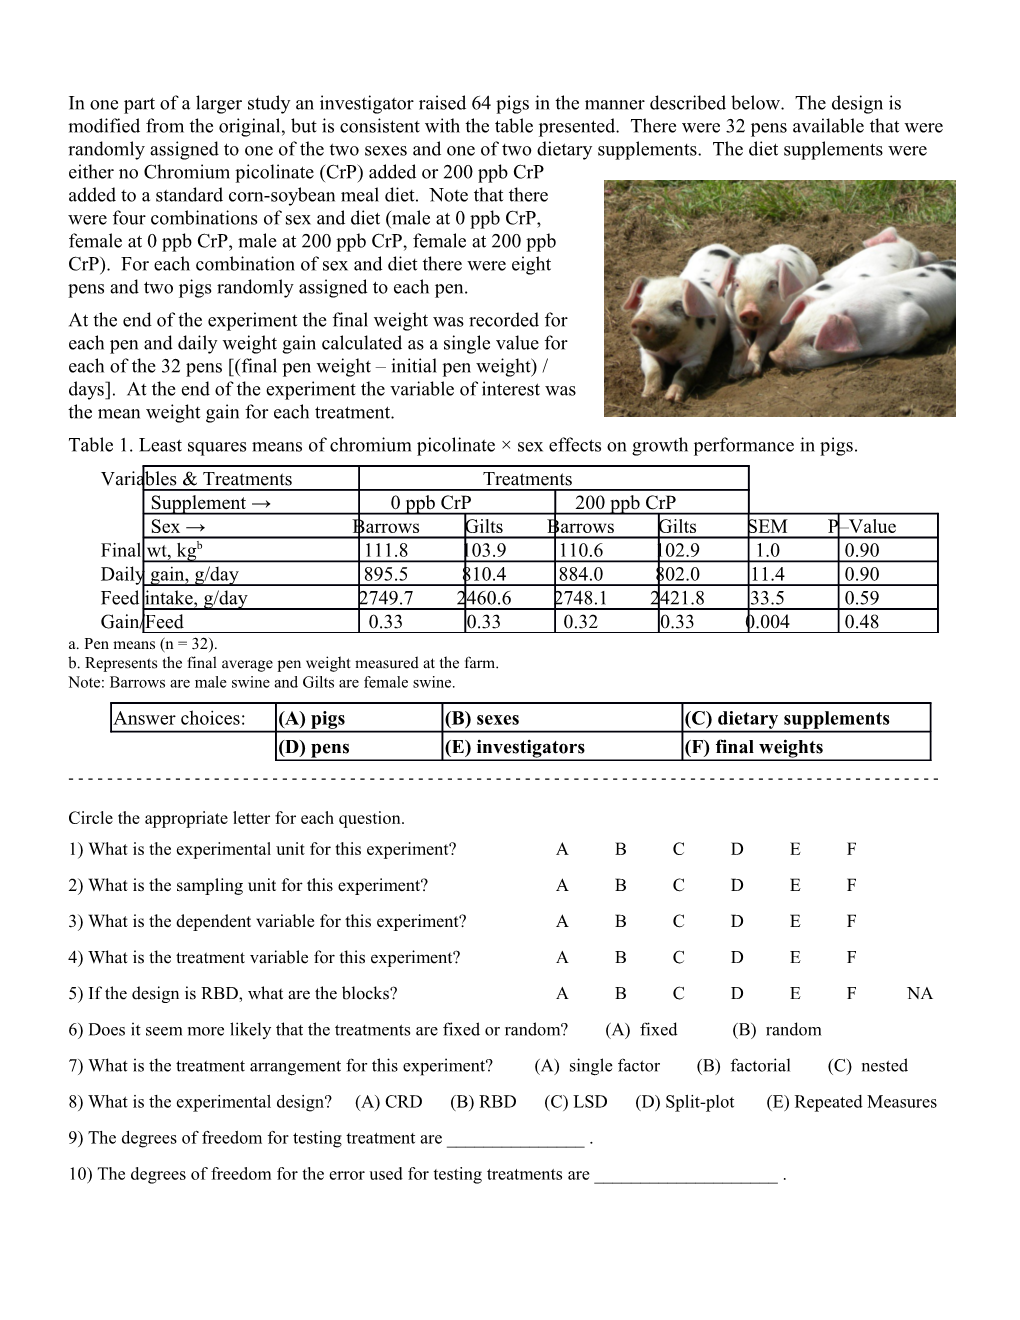 Table 1. Least Squares Means of Chromium Picolinate Sex Effects on Growth Performance in Pigs